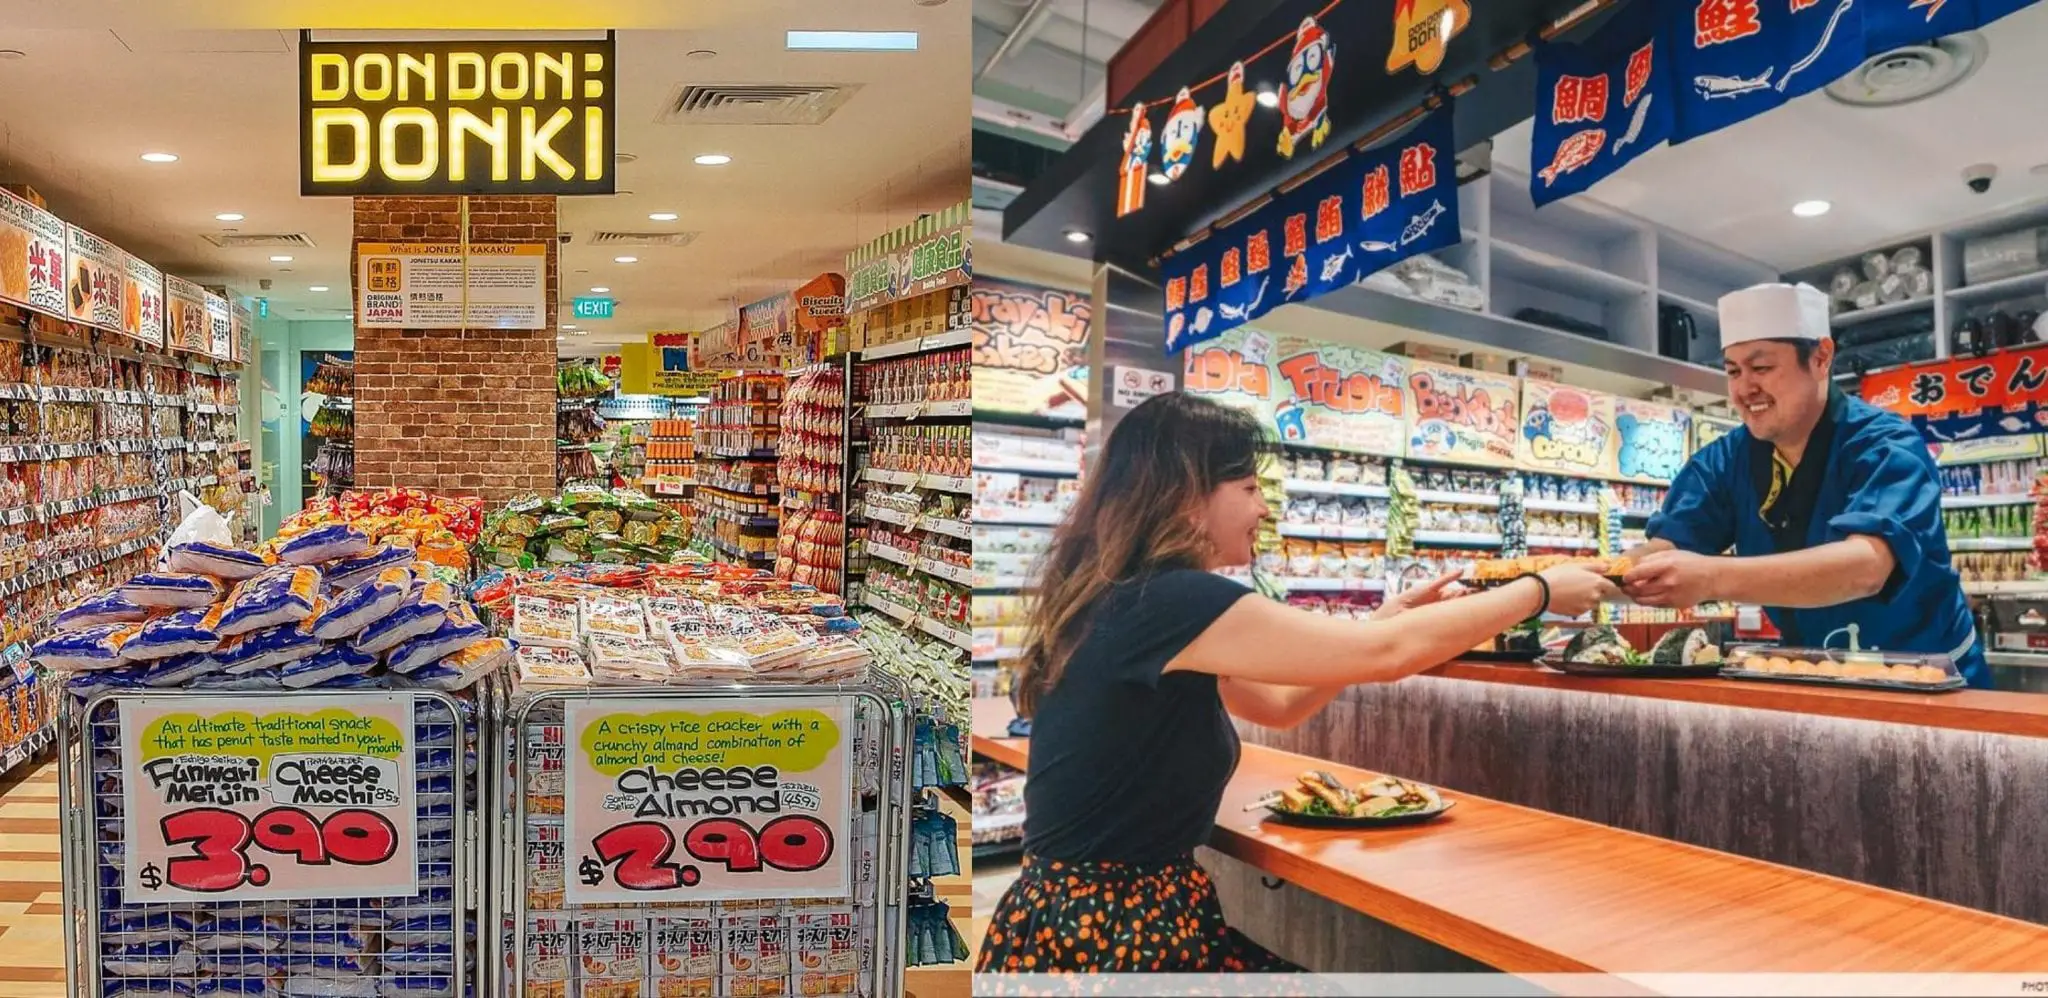 Don Don Donki; Japan’s Famous Discount Store Officially Coming To KL